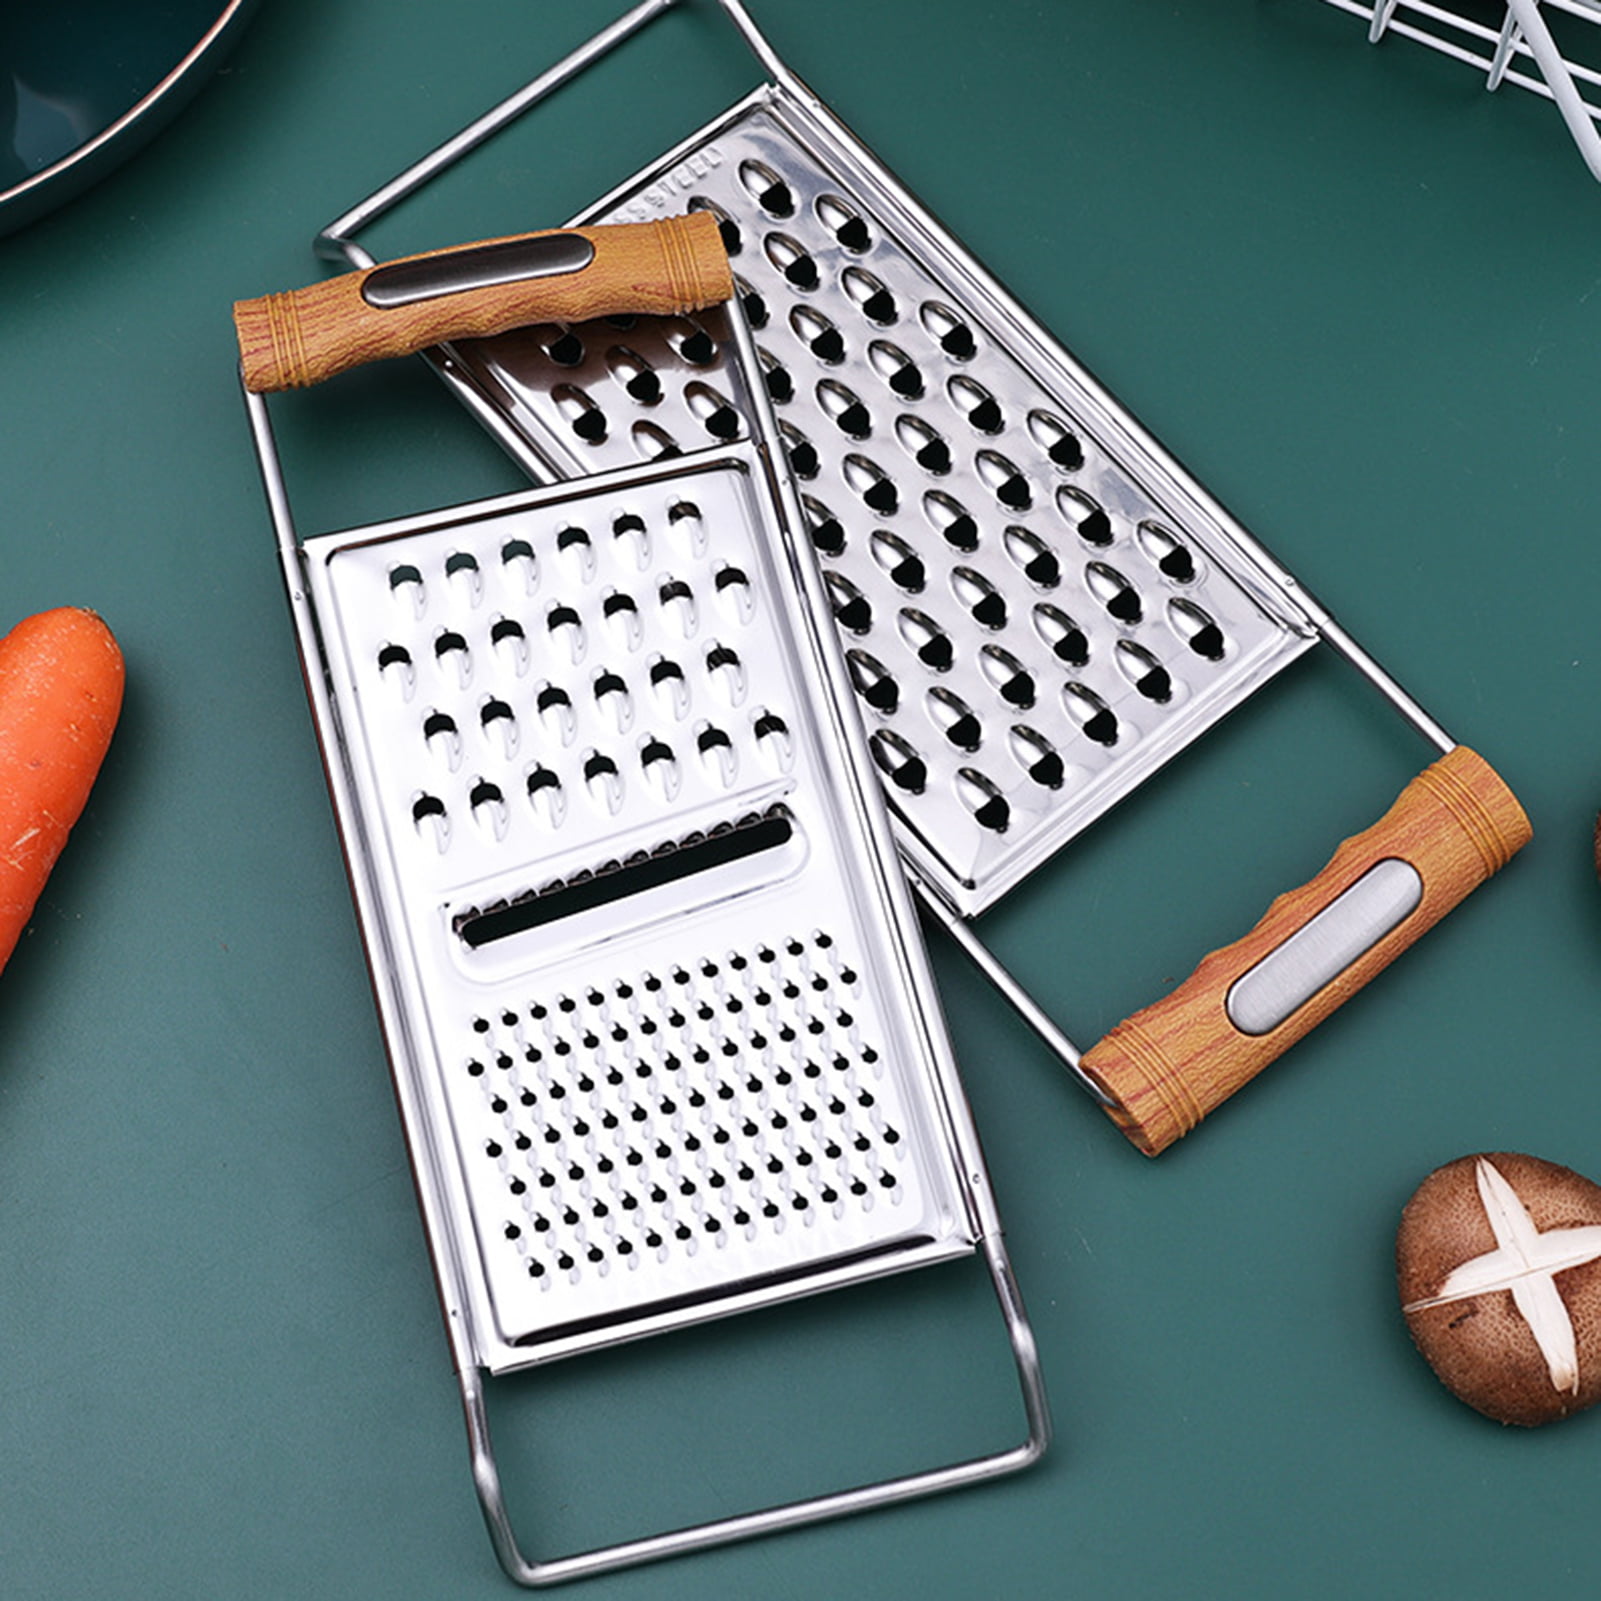 SublimeCuts Handheld Cheese Grater: Stainless Steel, Multi Purpose Kitchen  Tool For Cheese, Chocolate, Fruit & Vegetables From Smyy7, $1.29